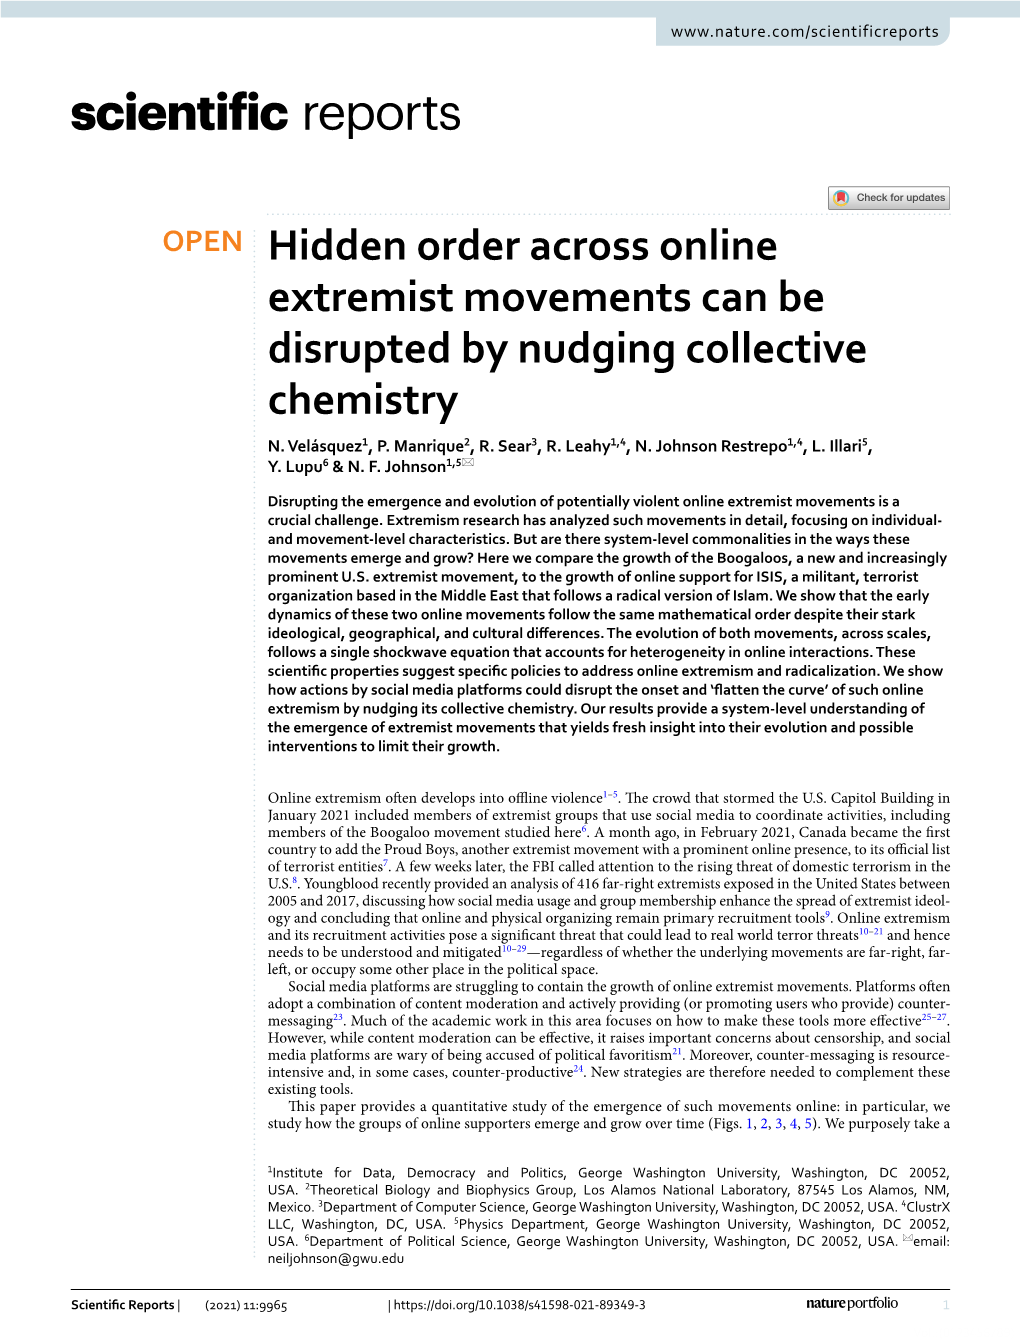 Hidden Order Across Online Extremist Movements Can Be Disrupted by Nudging Collective Chemistry N